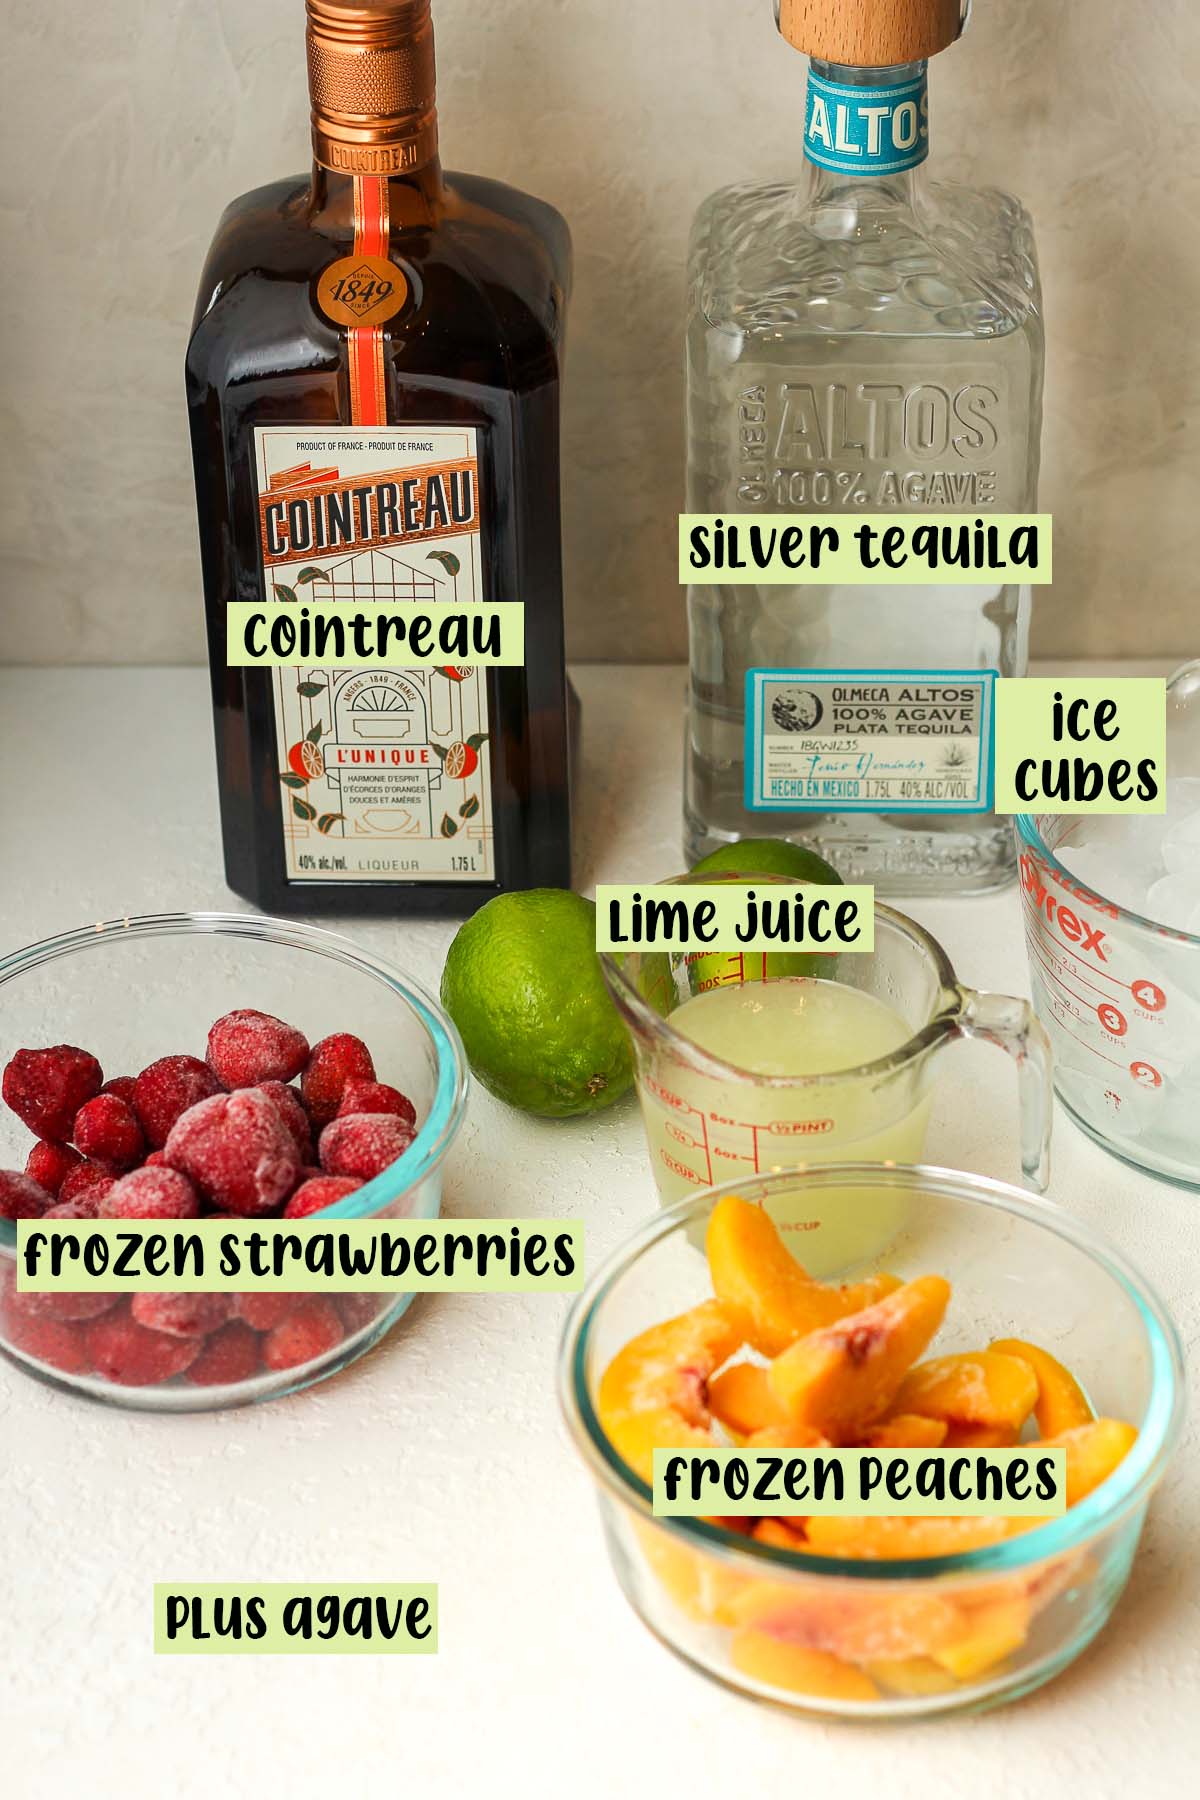 The labeled ingredients for fruity margaritas.